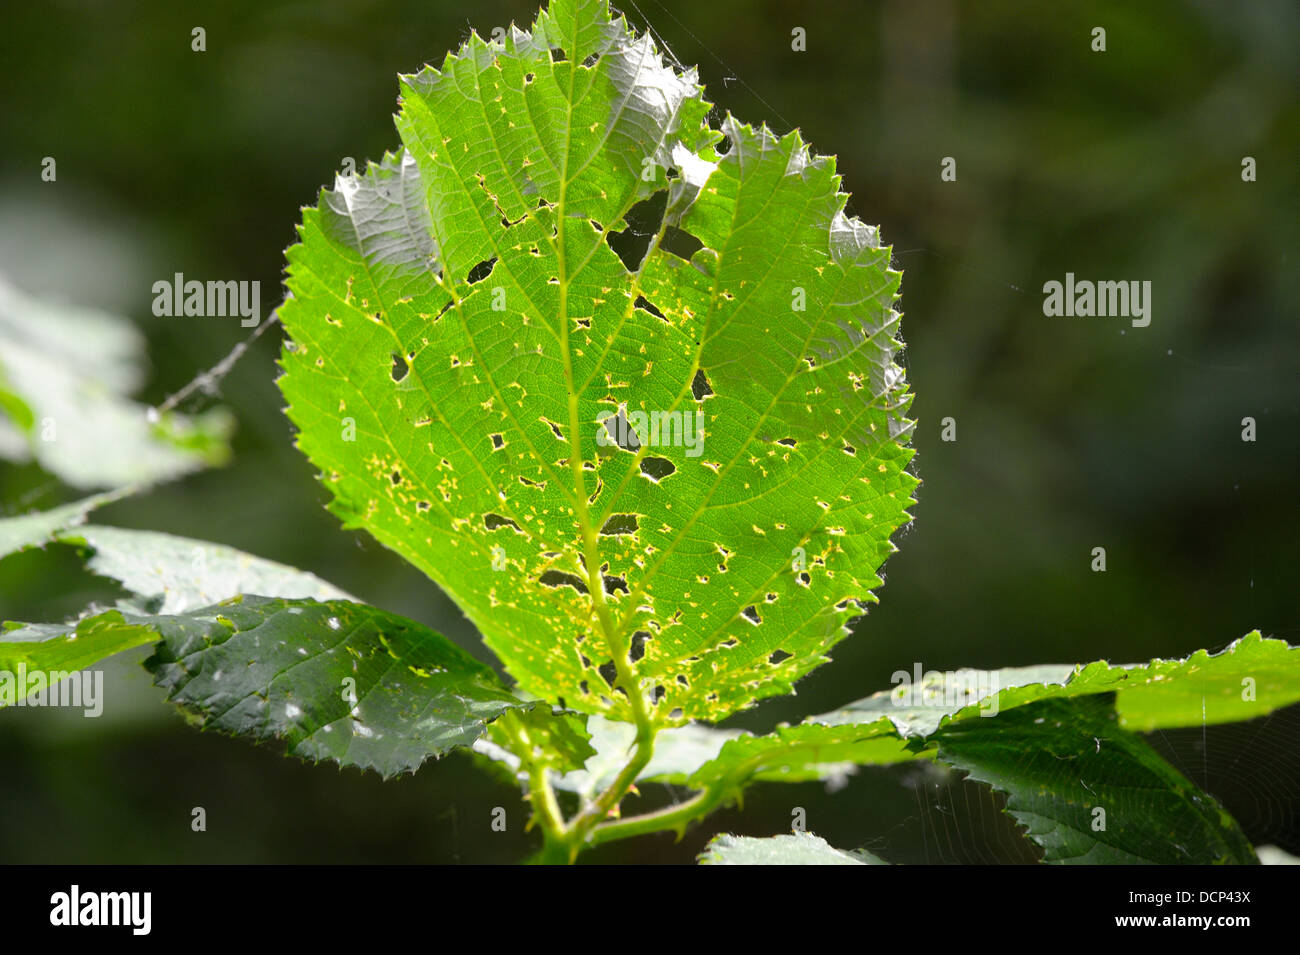 A leaf eaten by insects Stock Photo